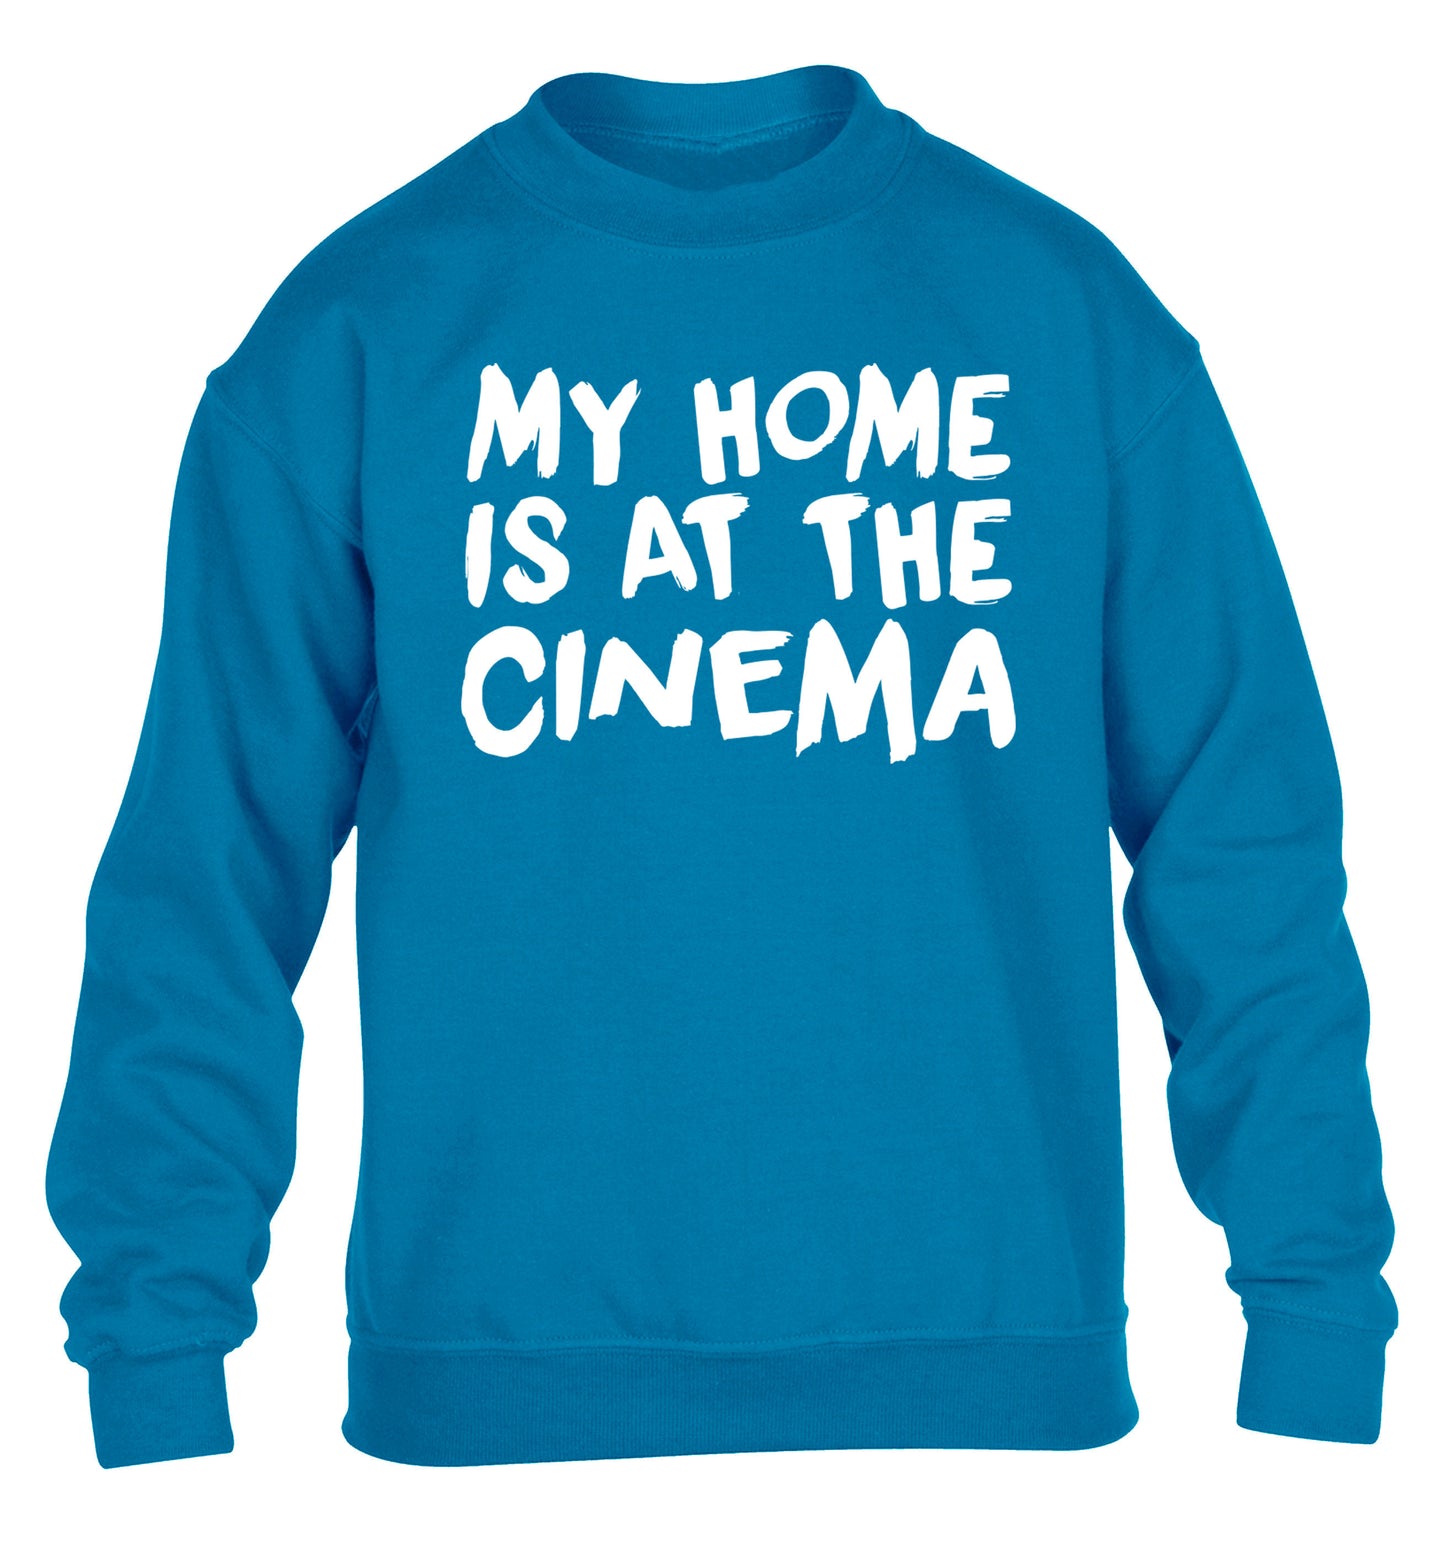 My home is at the cinema children's blue sweater 12-14 Years